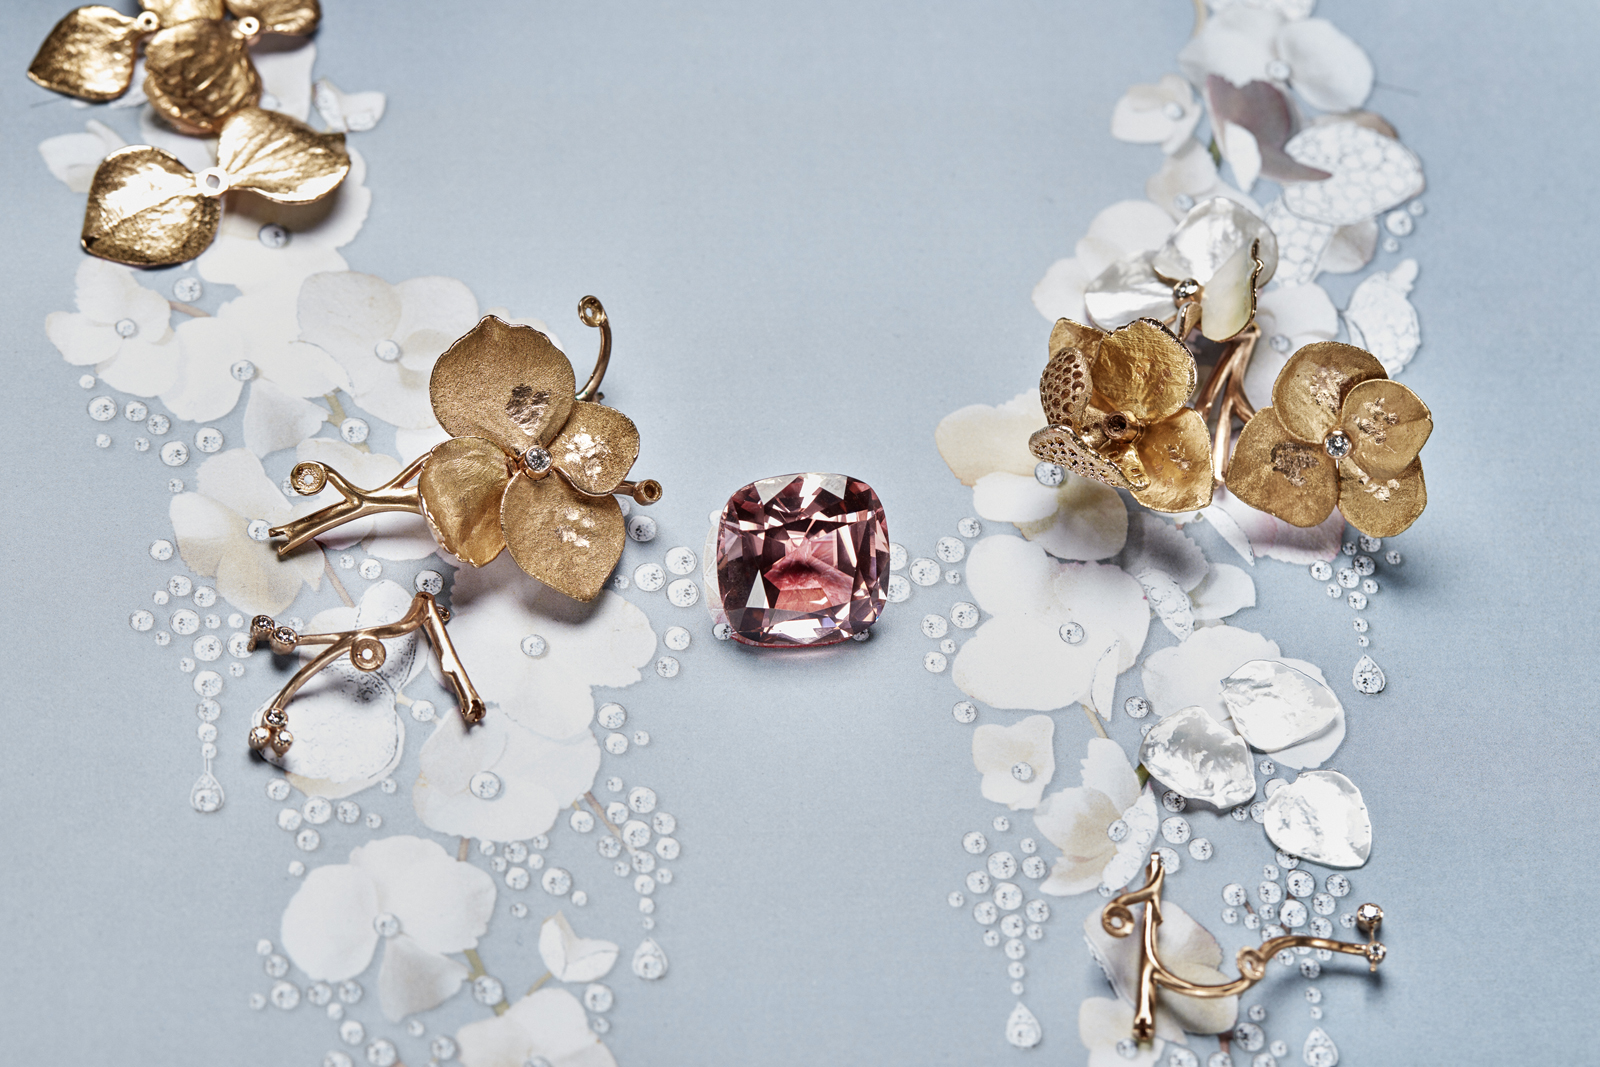 The creation of the Boucheron ‘Nuage de Fleurs’ necklace with 42.96 carat cushion cut pink tourmaline, mother of pearl and pave set diamonds in rose gold